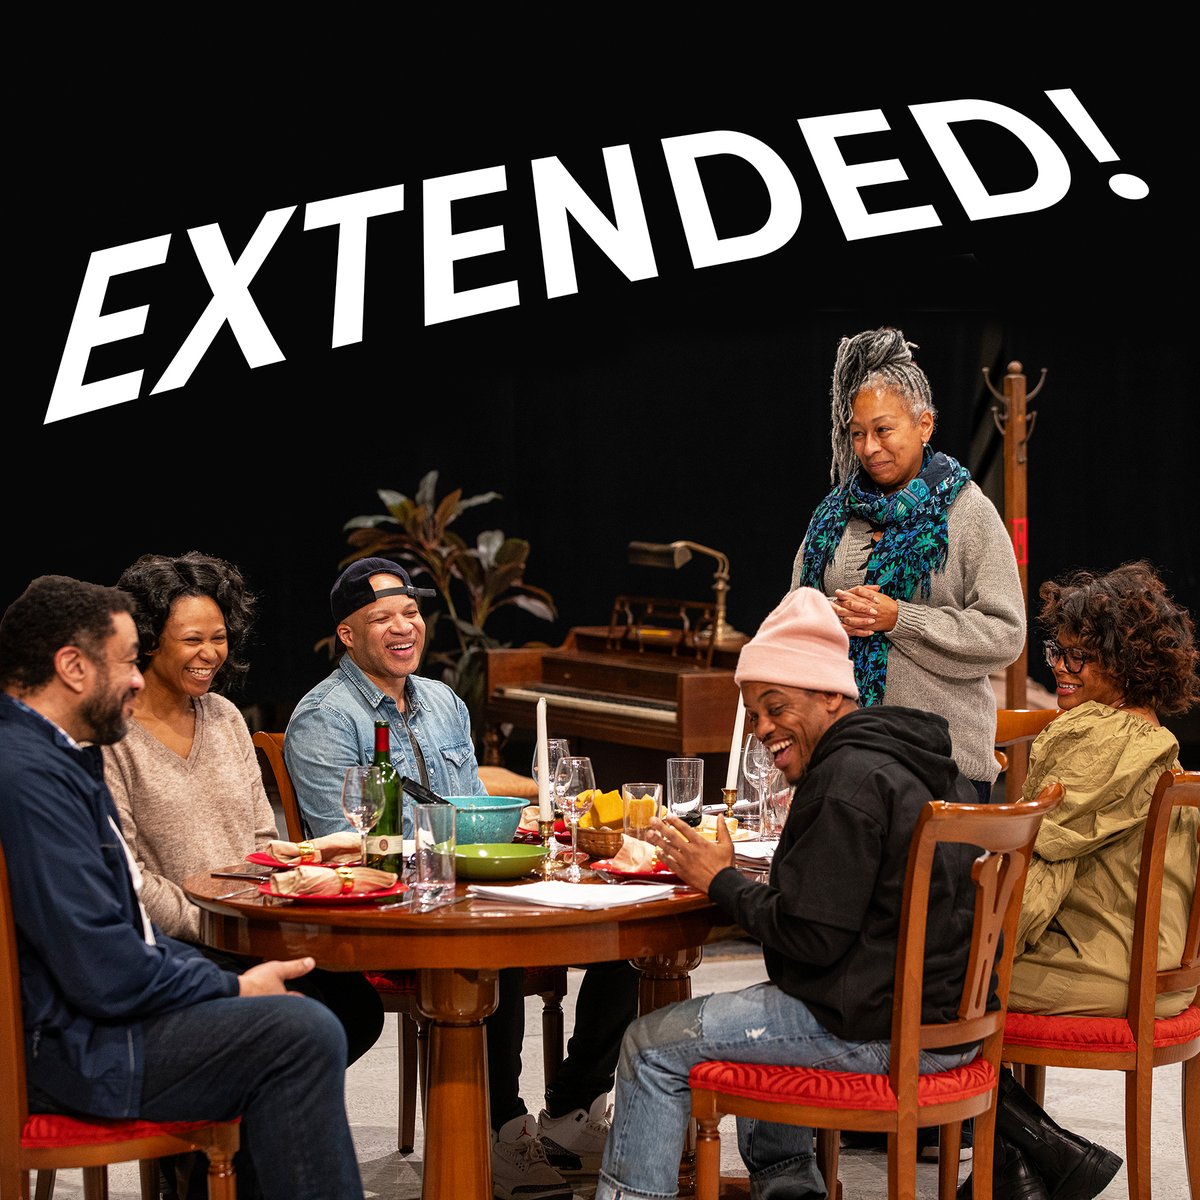 Y'all ain't ready. This epic family drama starts previews next week—and is now extended by popular demand through April 28.

Get your seats @ steppenwolf.org/purpose
#PurposeSTC #chicago #theatre